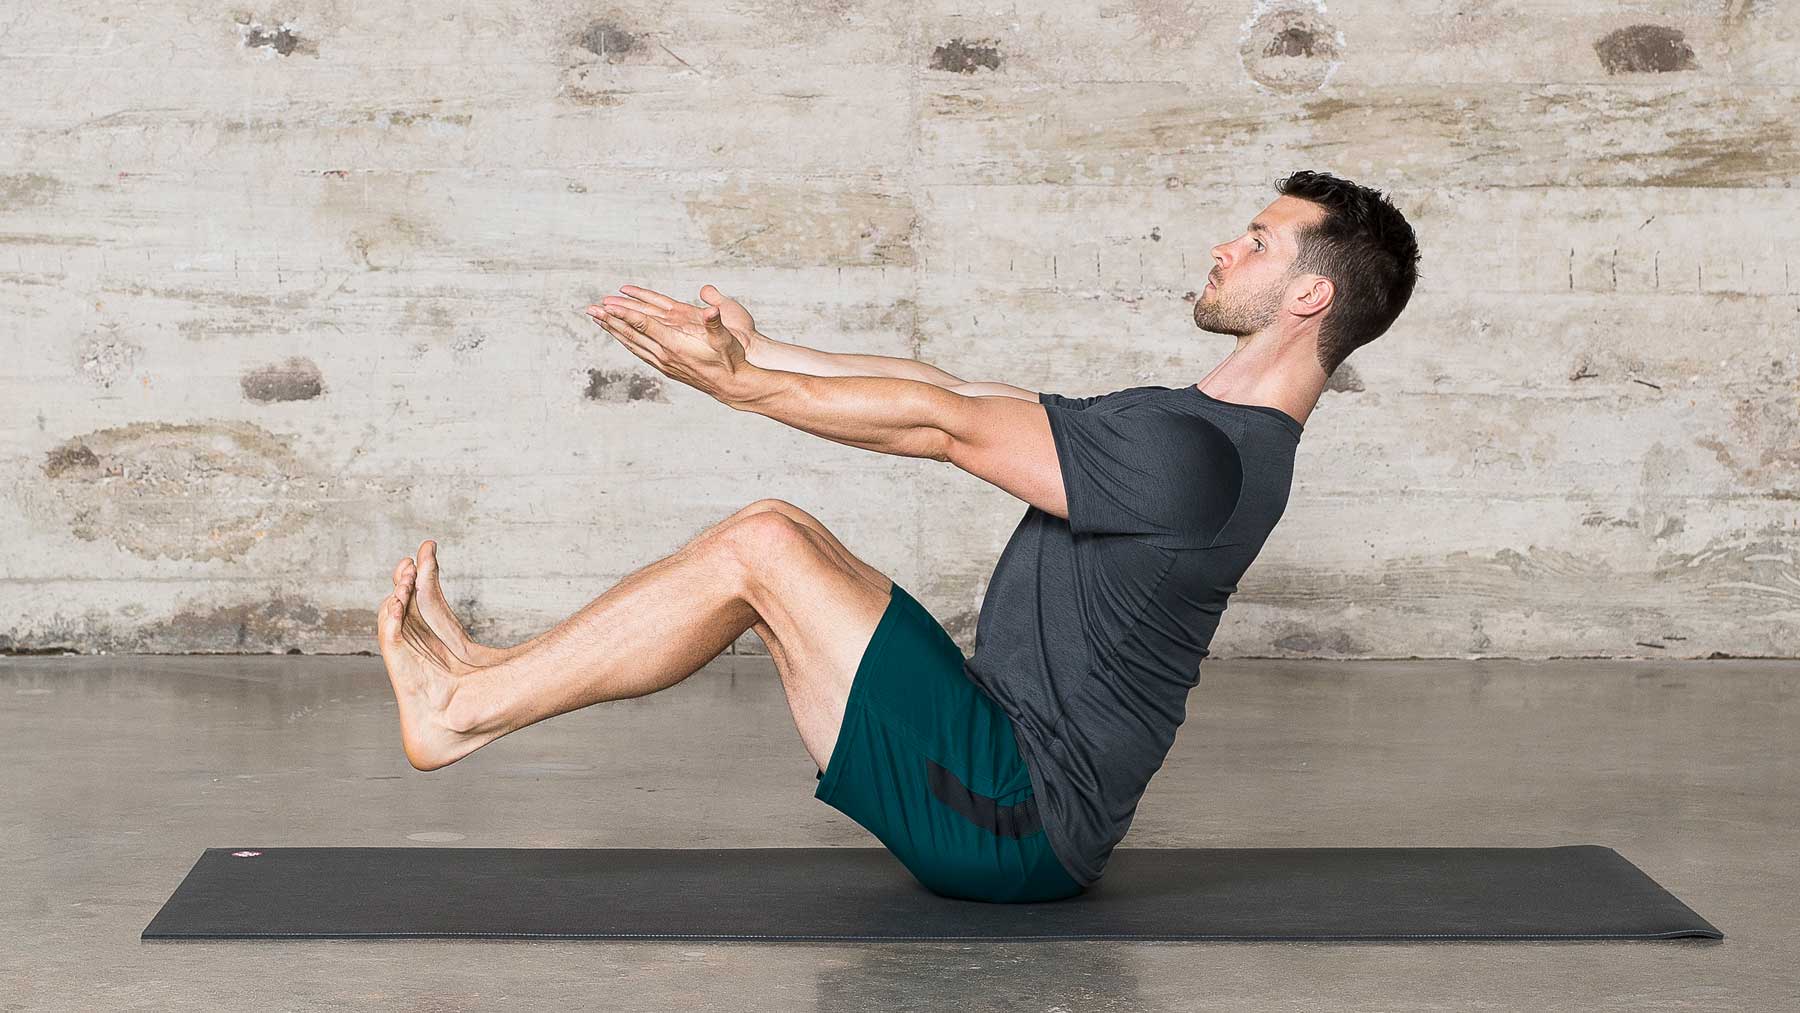 The 8 best yoga poses for men (with modifications)